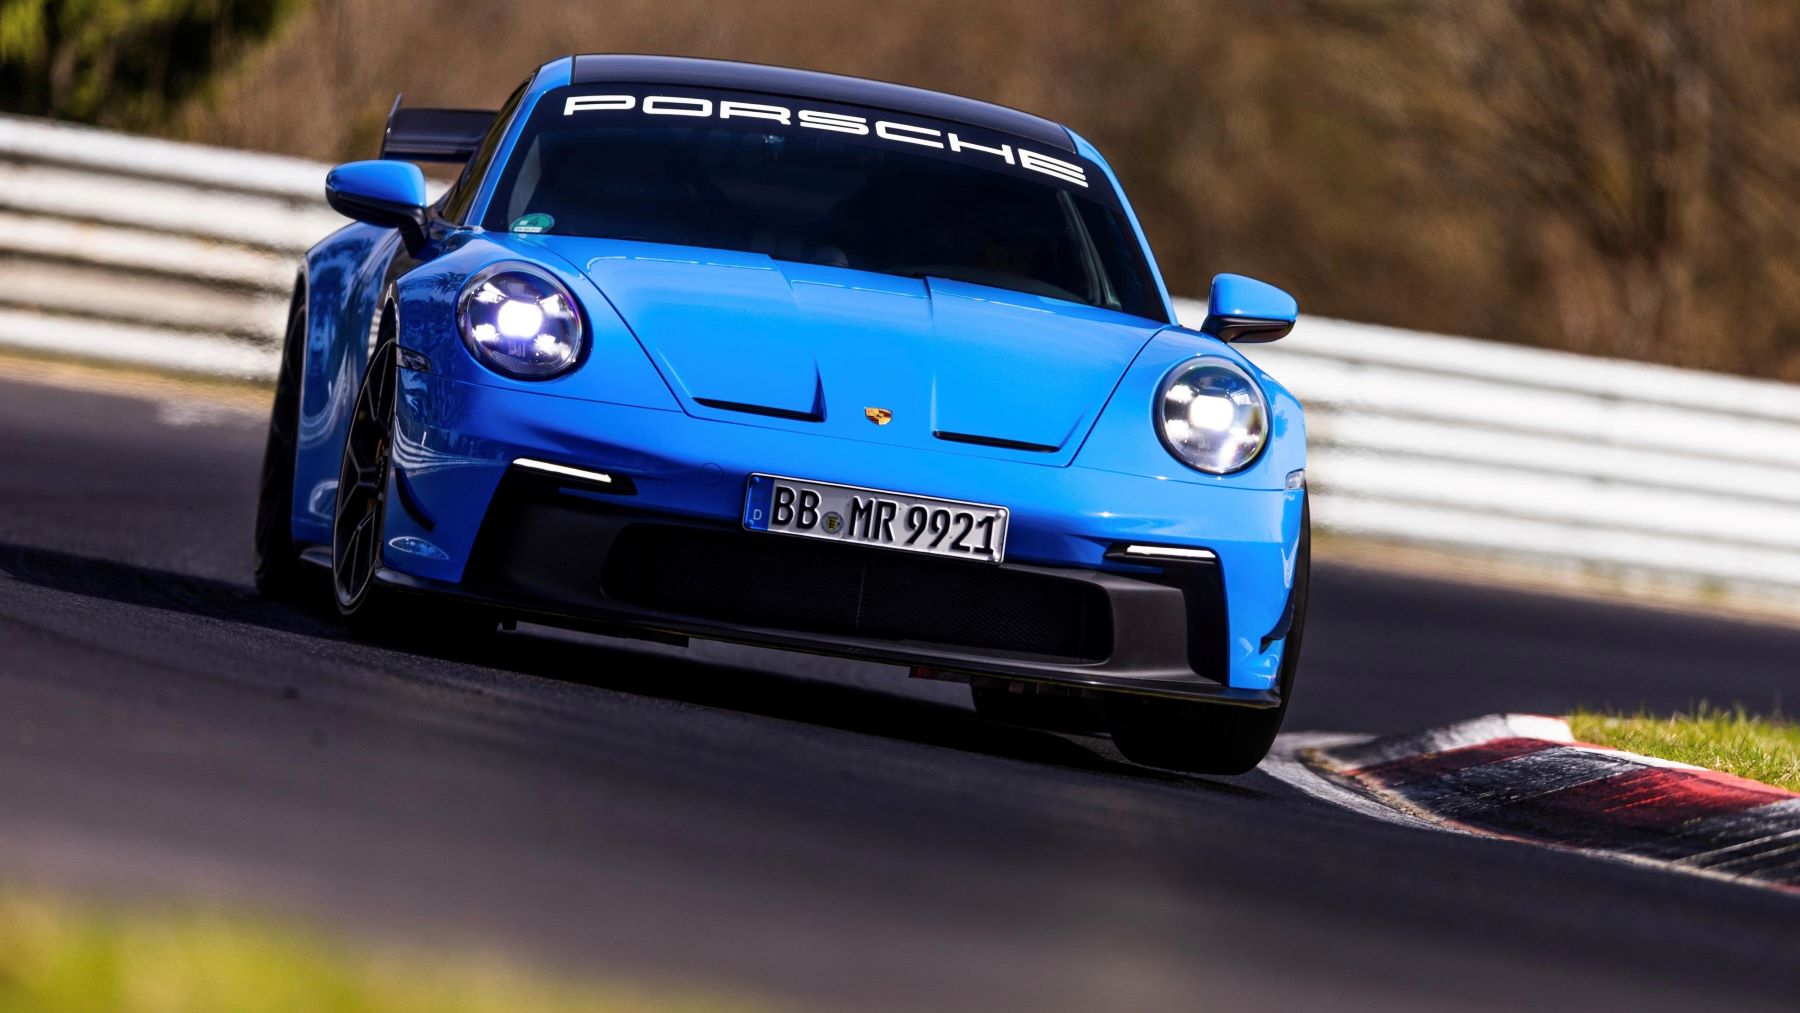 A light blue 2022 Porsche 911 GT3 performance sports car with available AWD driving on a racetrack